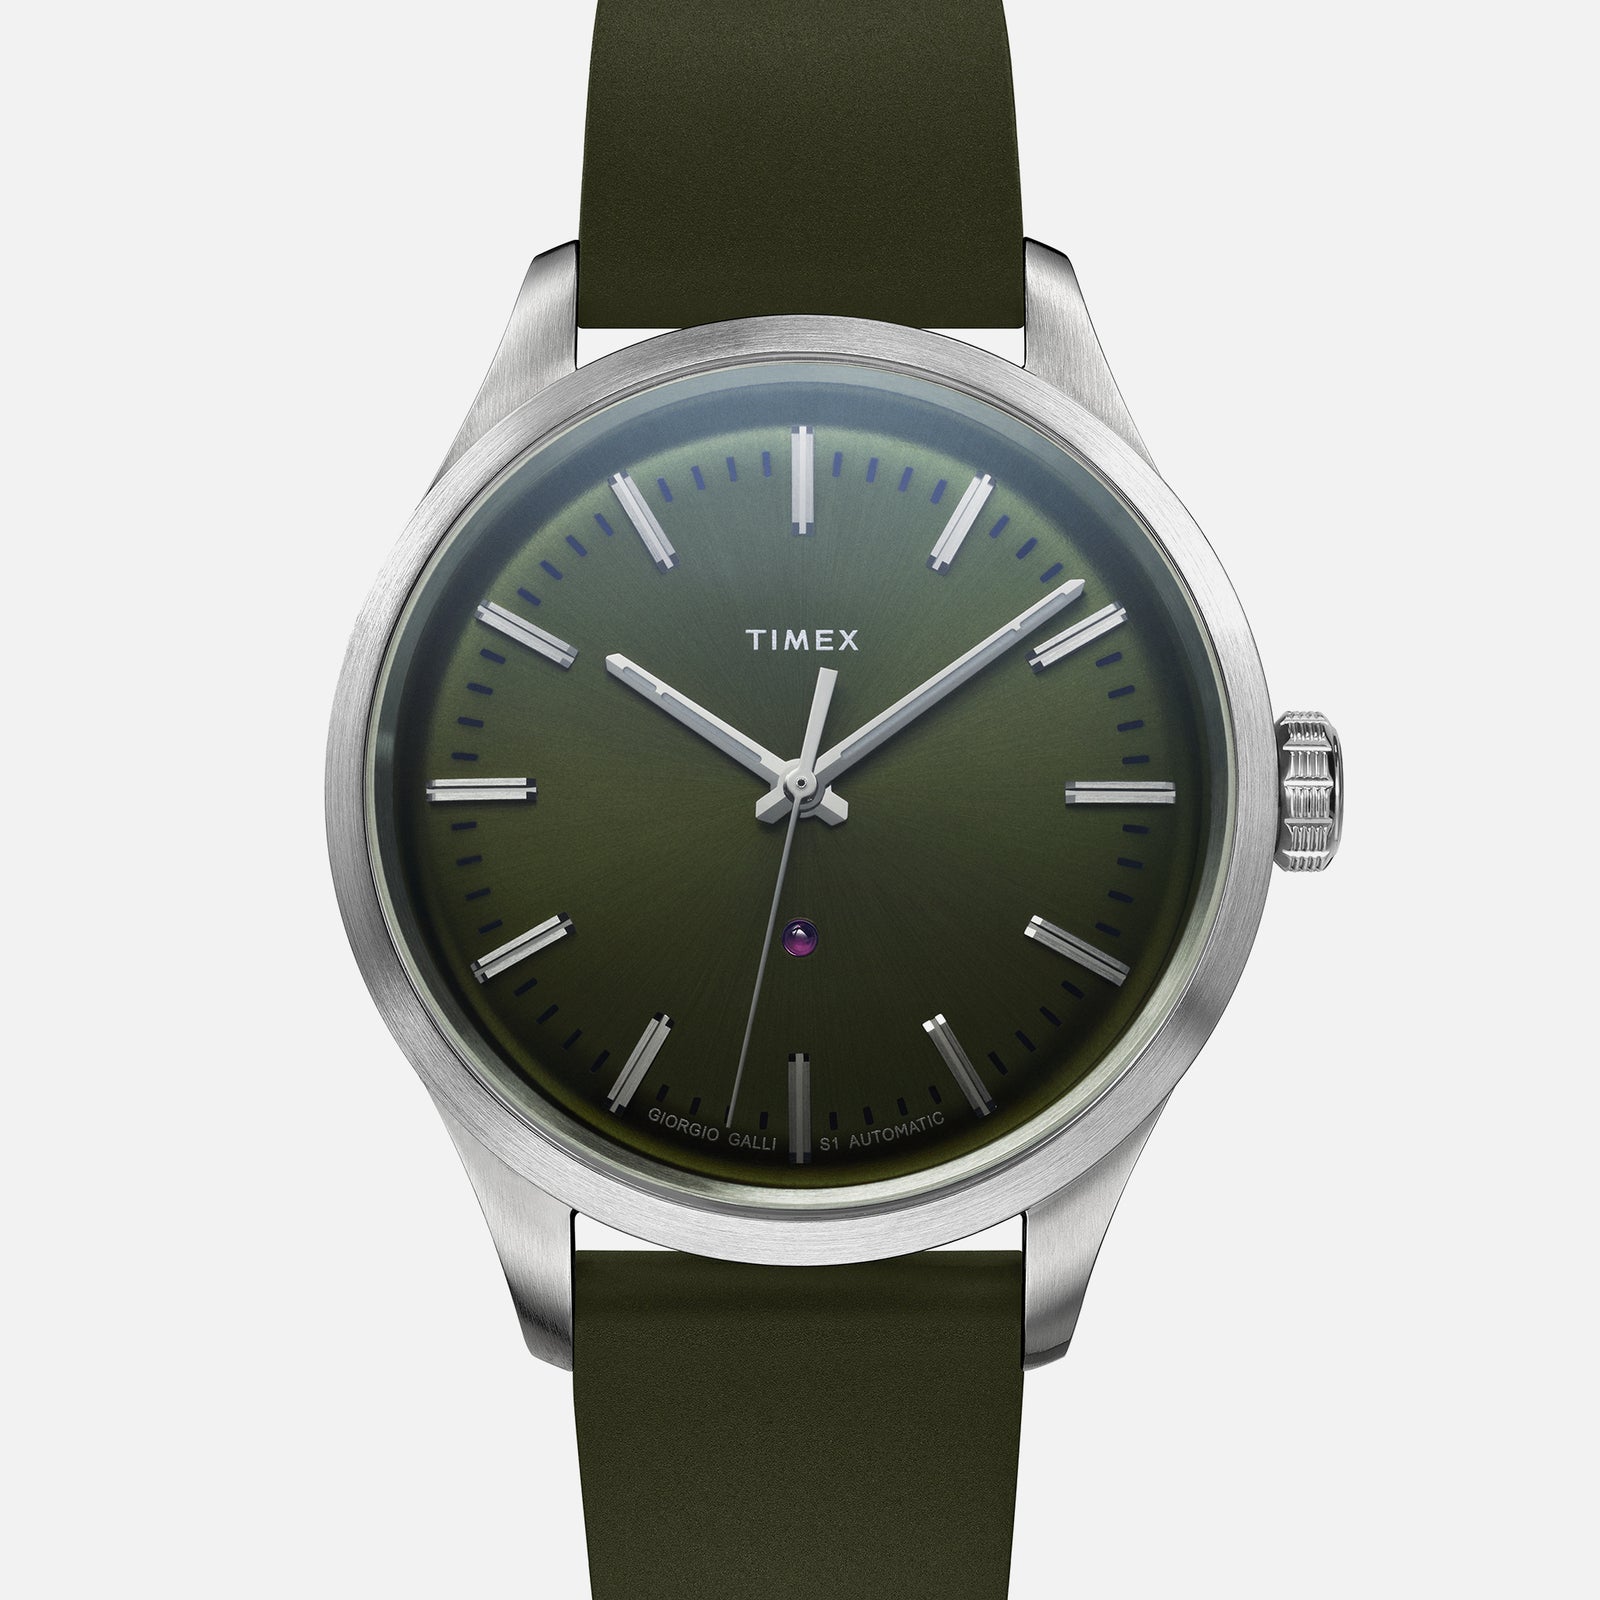 Soldier image of the green 天美时 Giorgio Galli S1 Automatic 38mm